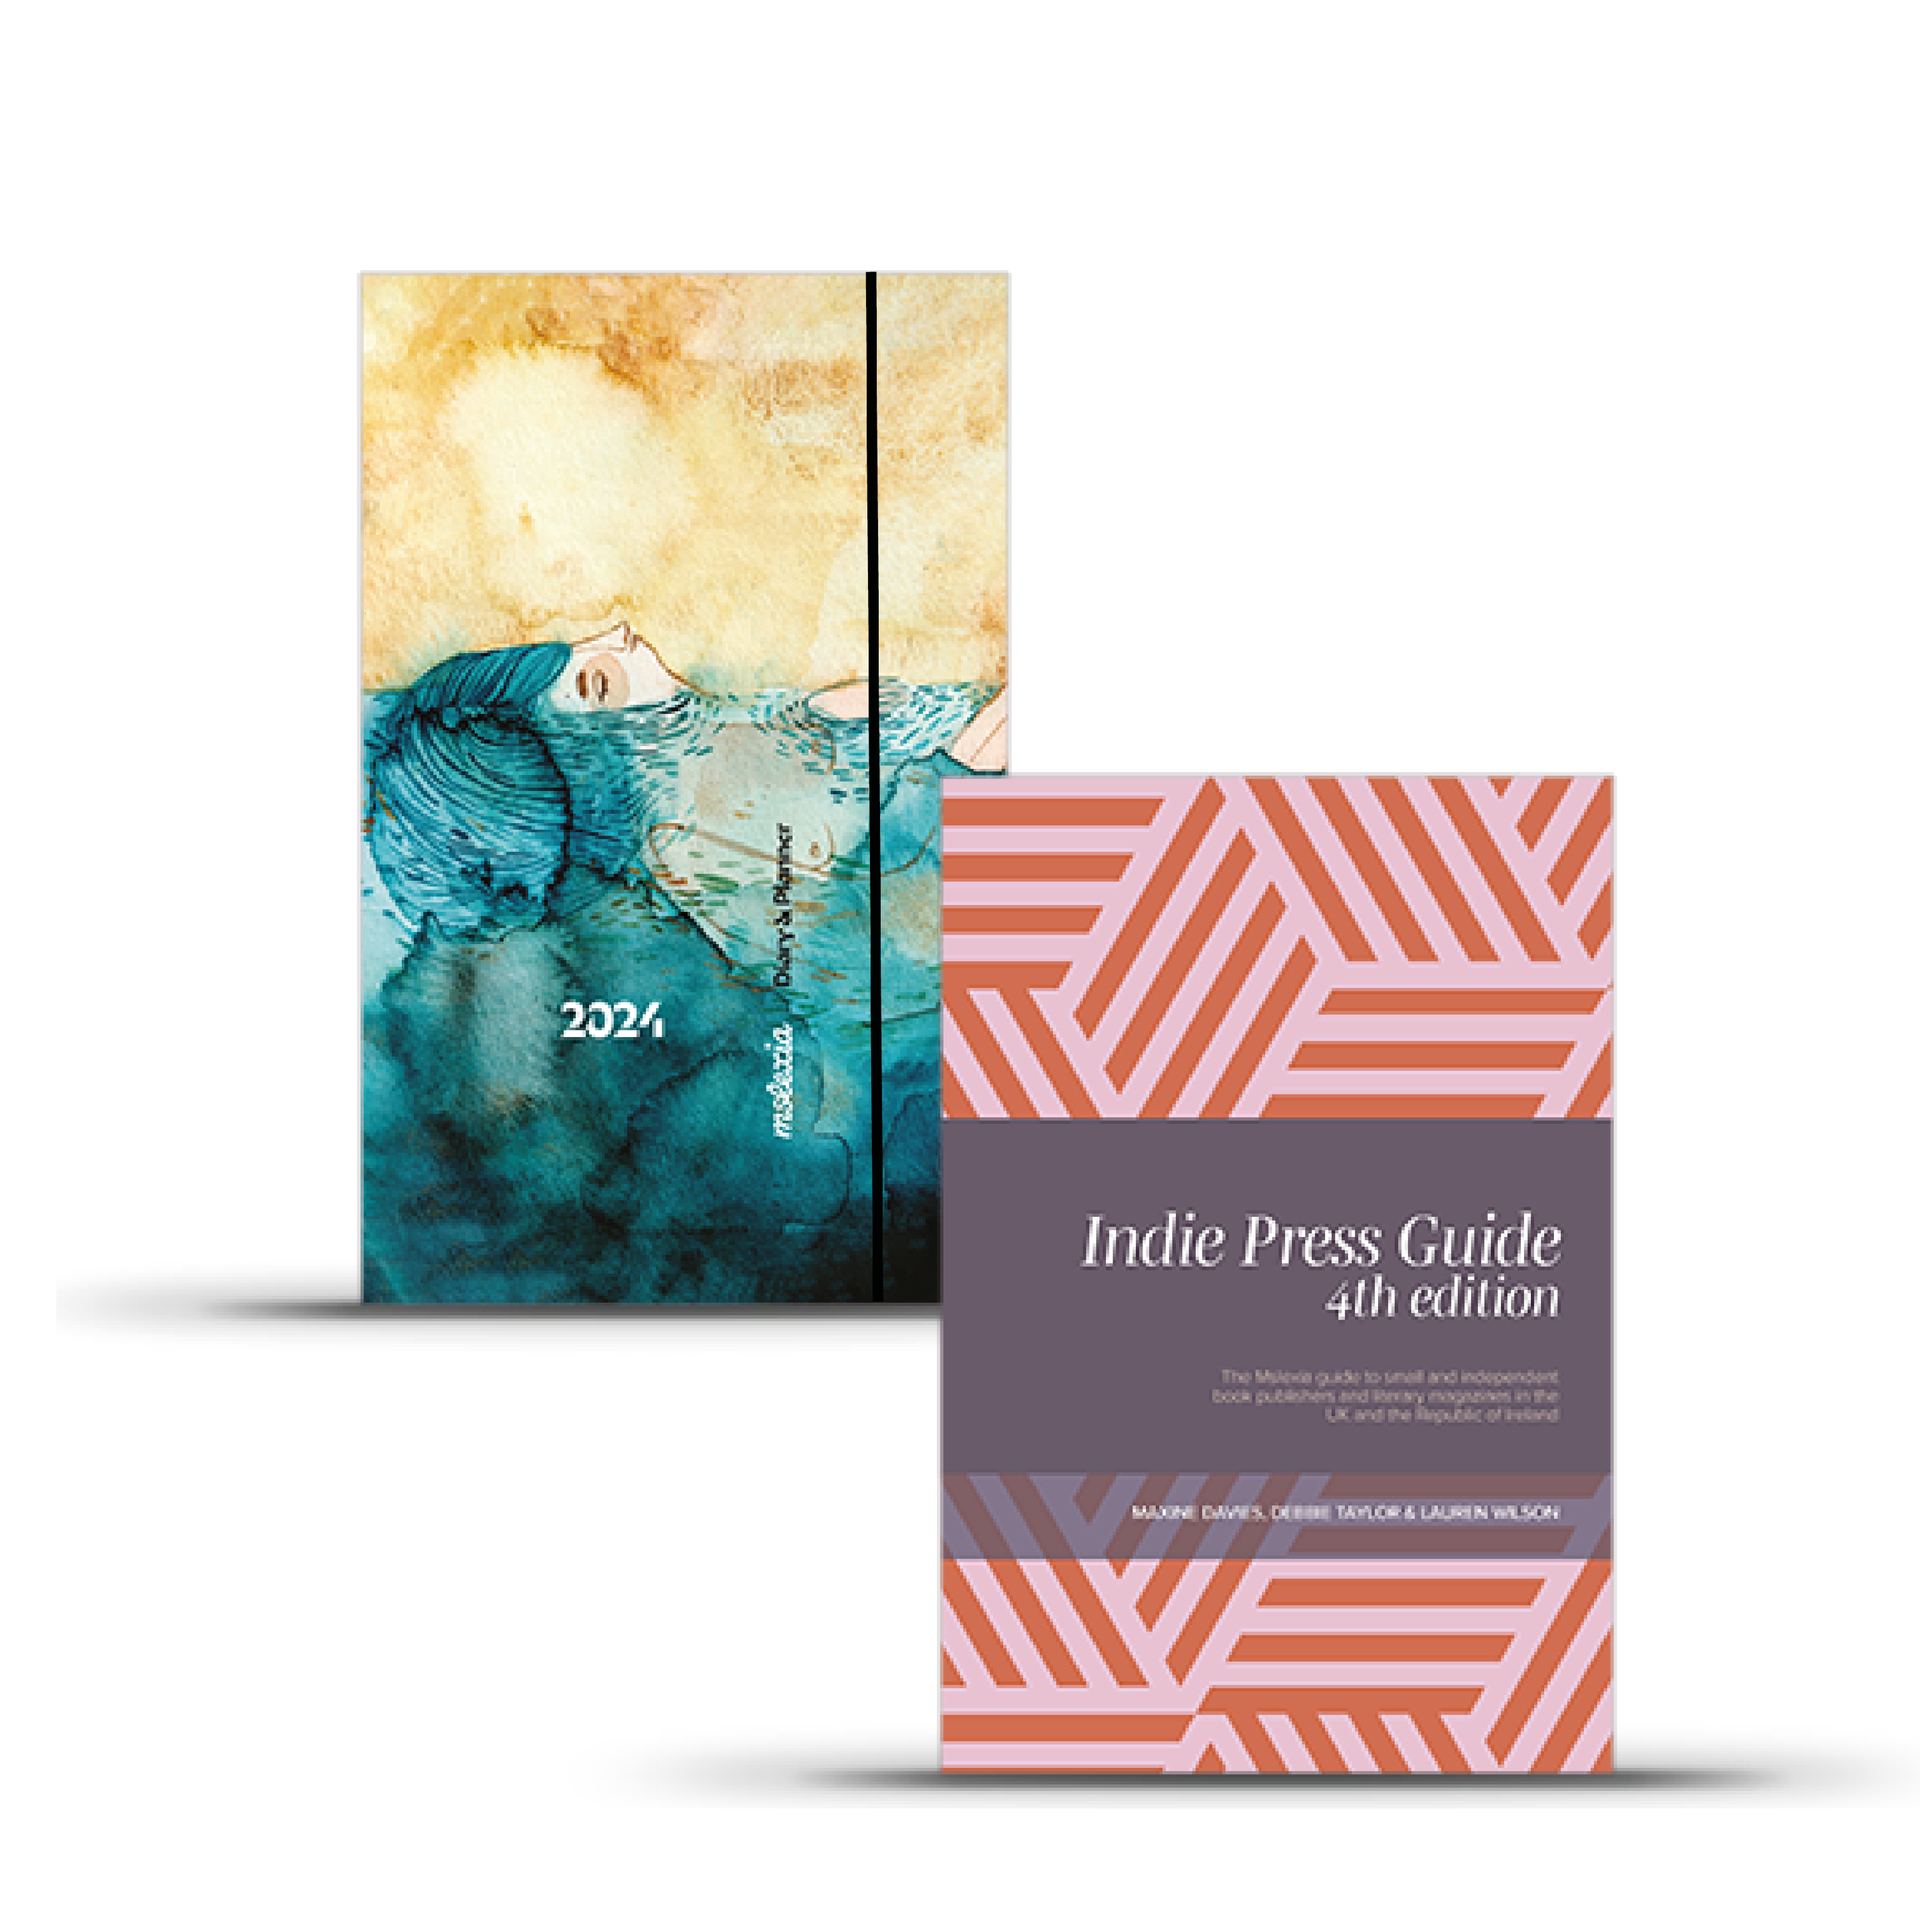 Diary & Planner + Indie Press Guide